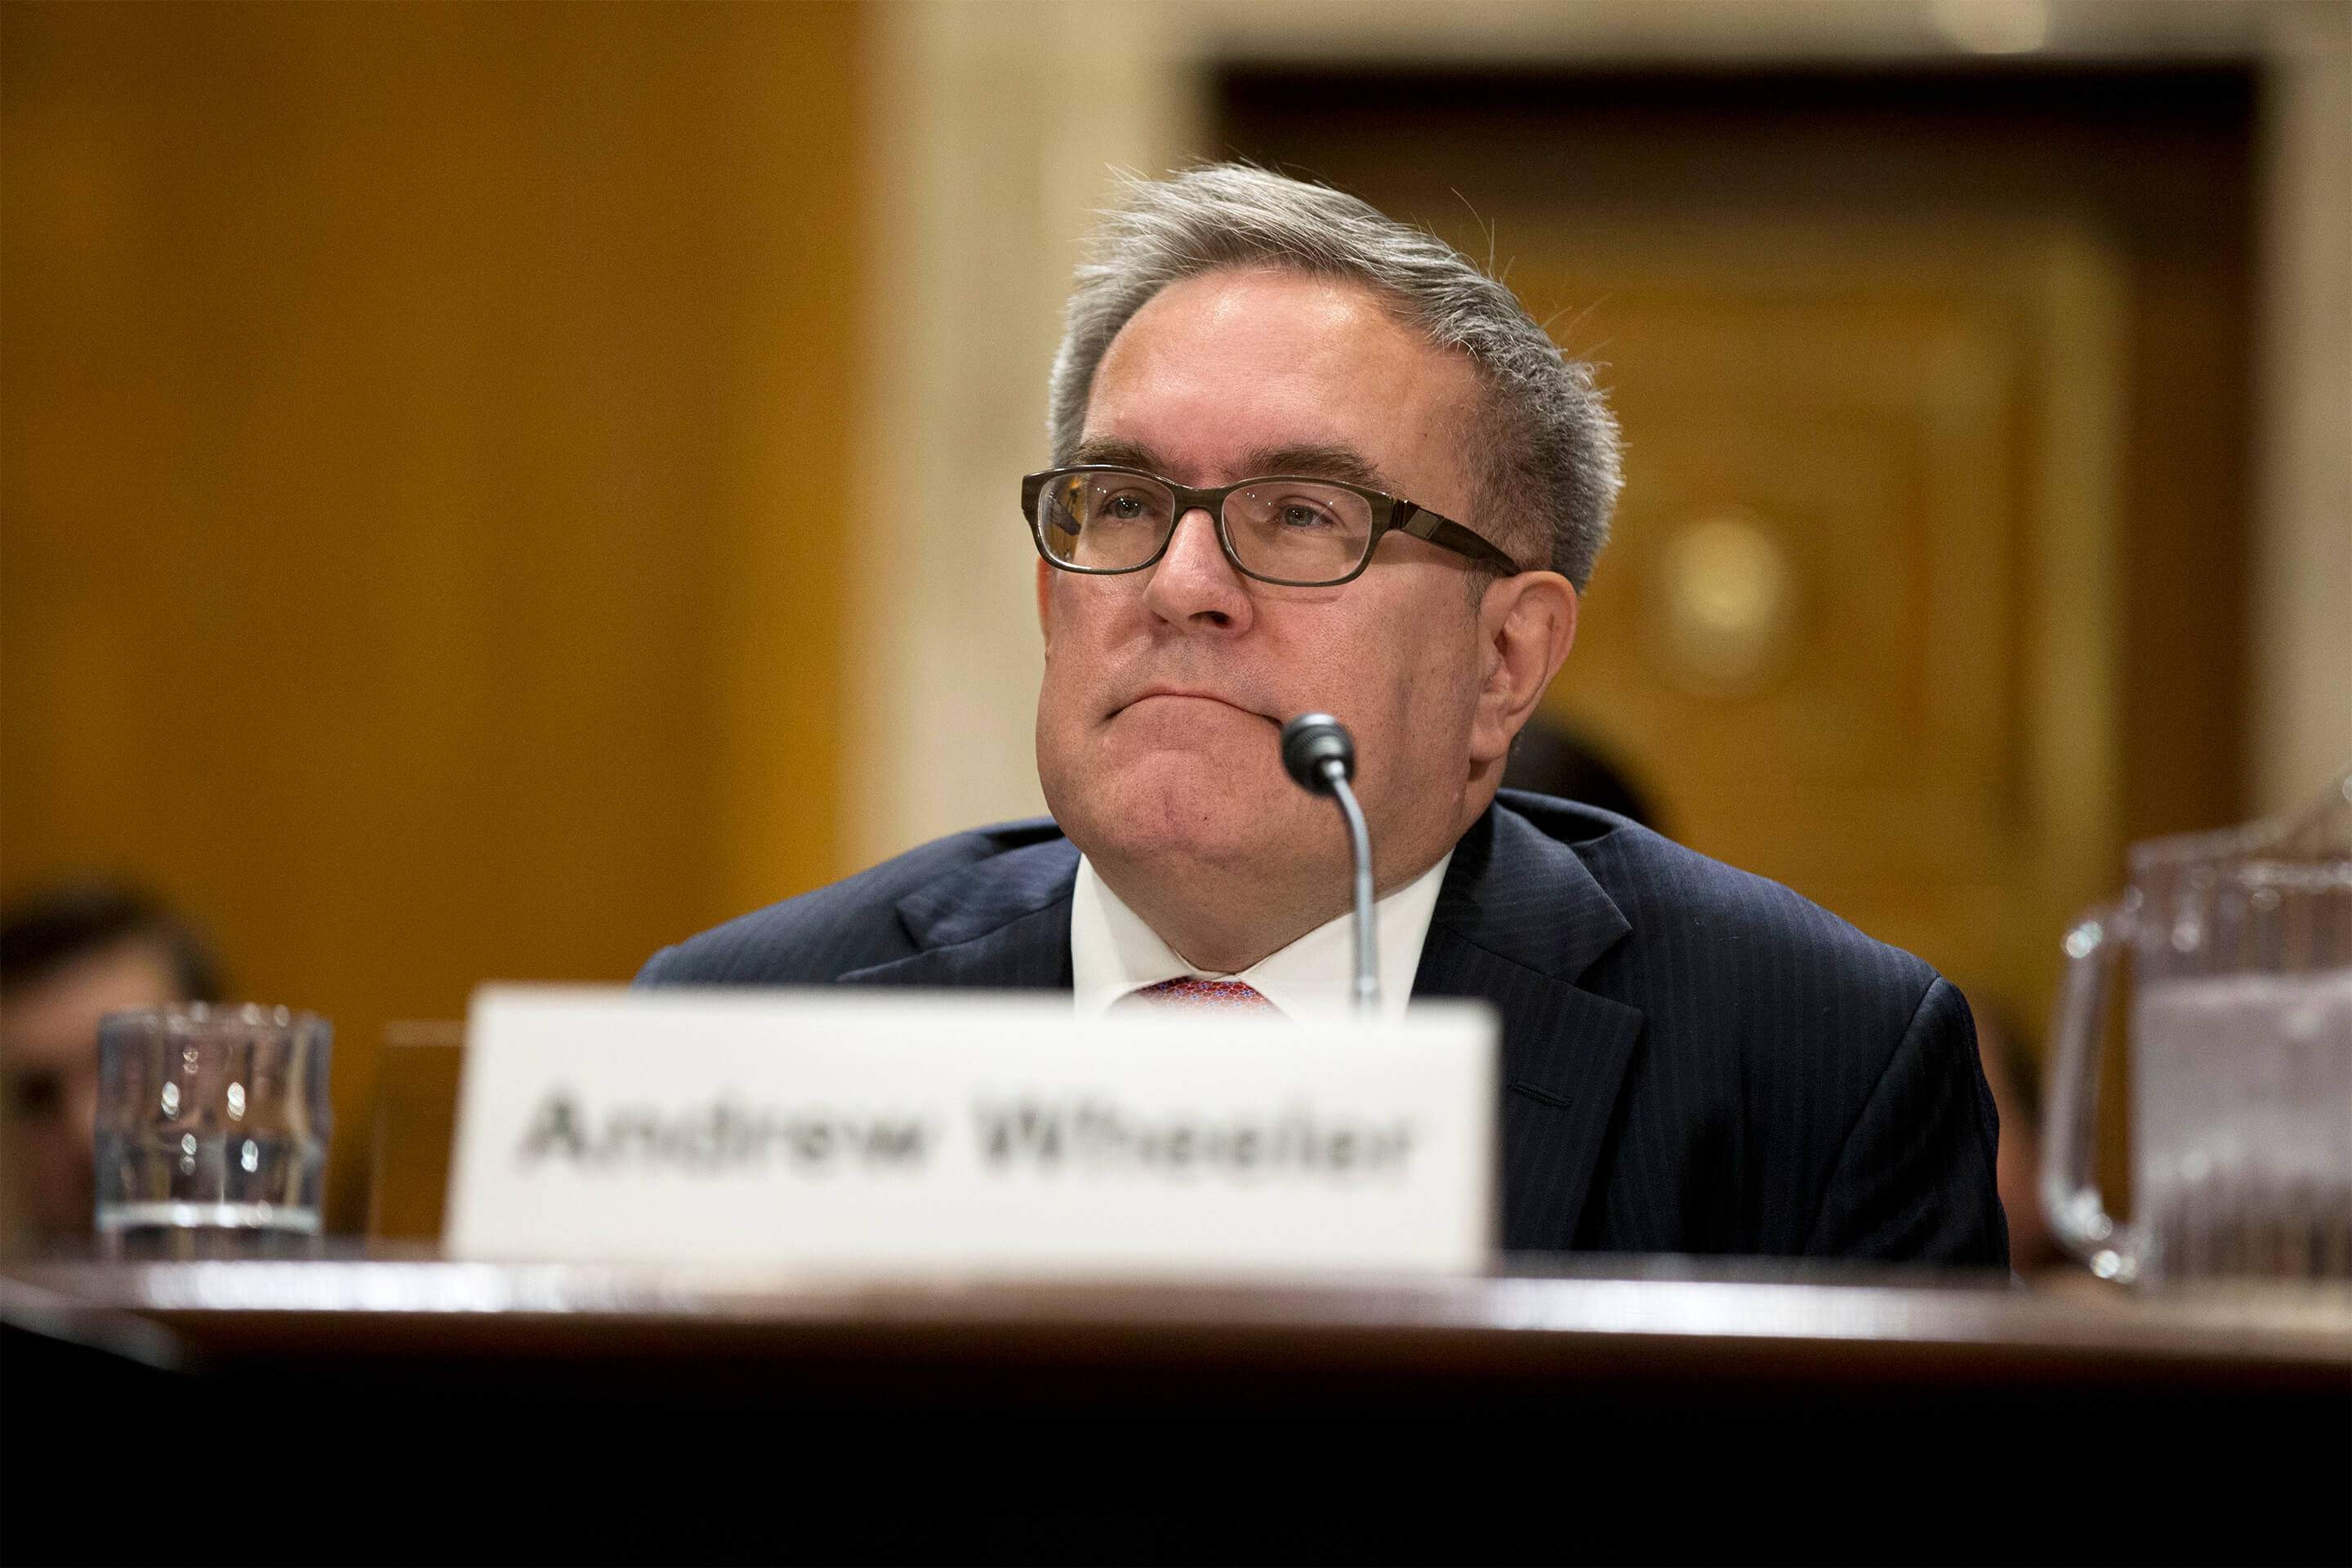 Andrew Wheeler during his confirmation hearing to be Deputy Administrator of the Environmental Protection Agency before the United States Senate Committee on the Environment and Public Works on Capitol Hill in Washington, D.C. on November 8th, 2017. Credit: Alex Edelman / CNP - NO WIRE SERVICE - Photo by: Alex Edelman/picture-alliance/dpa/AP Images